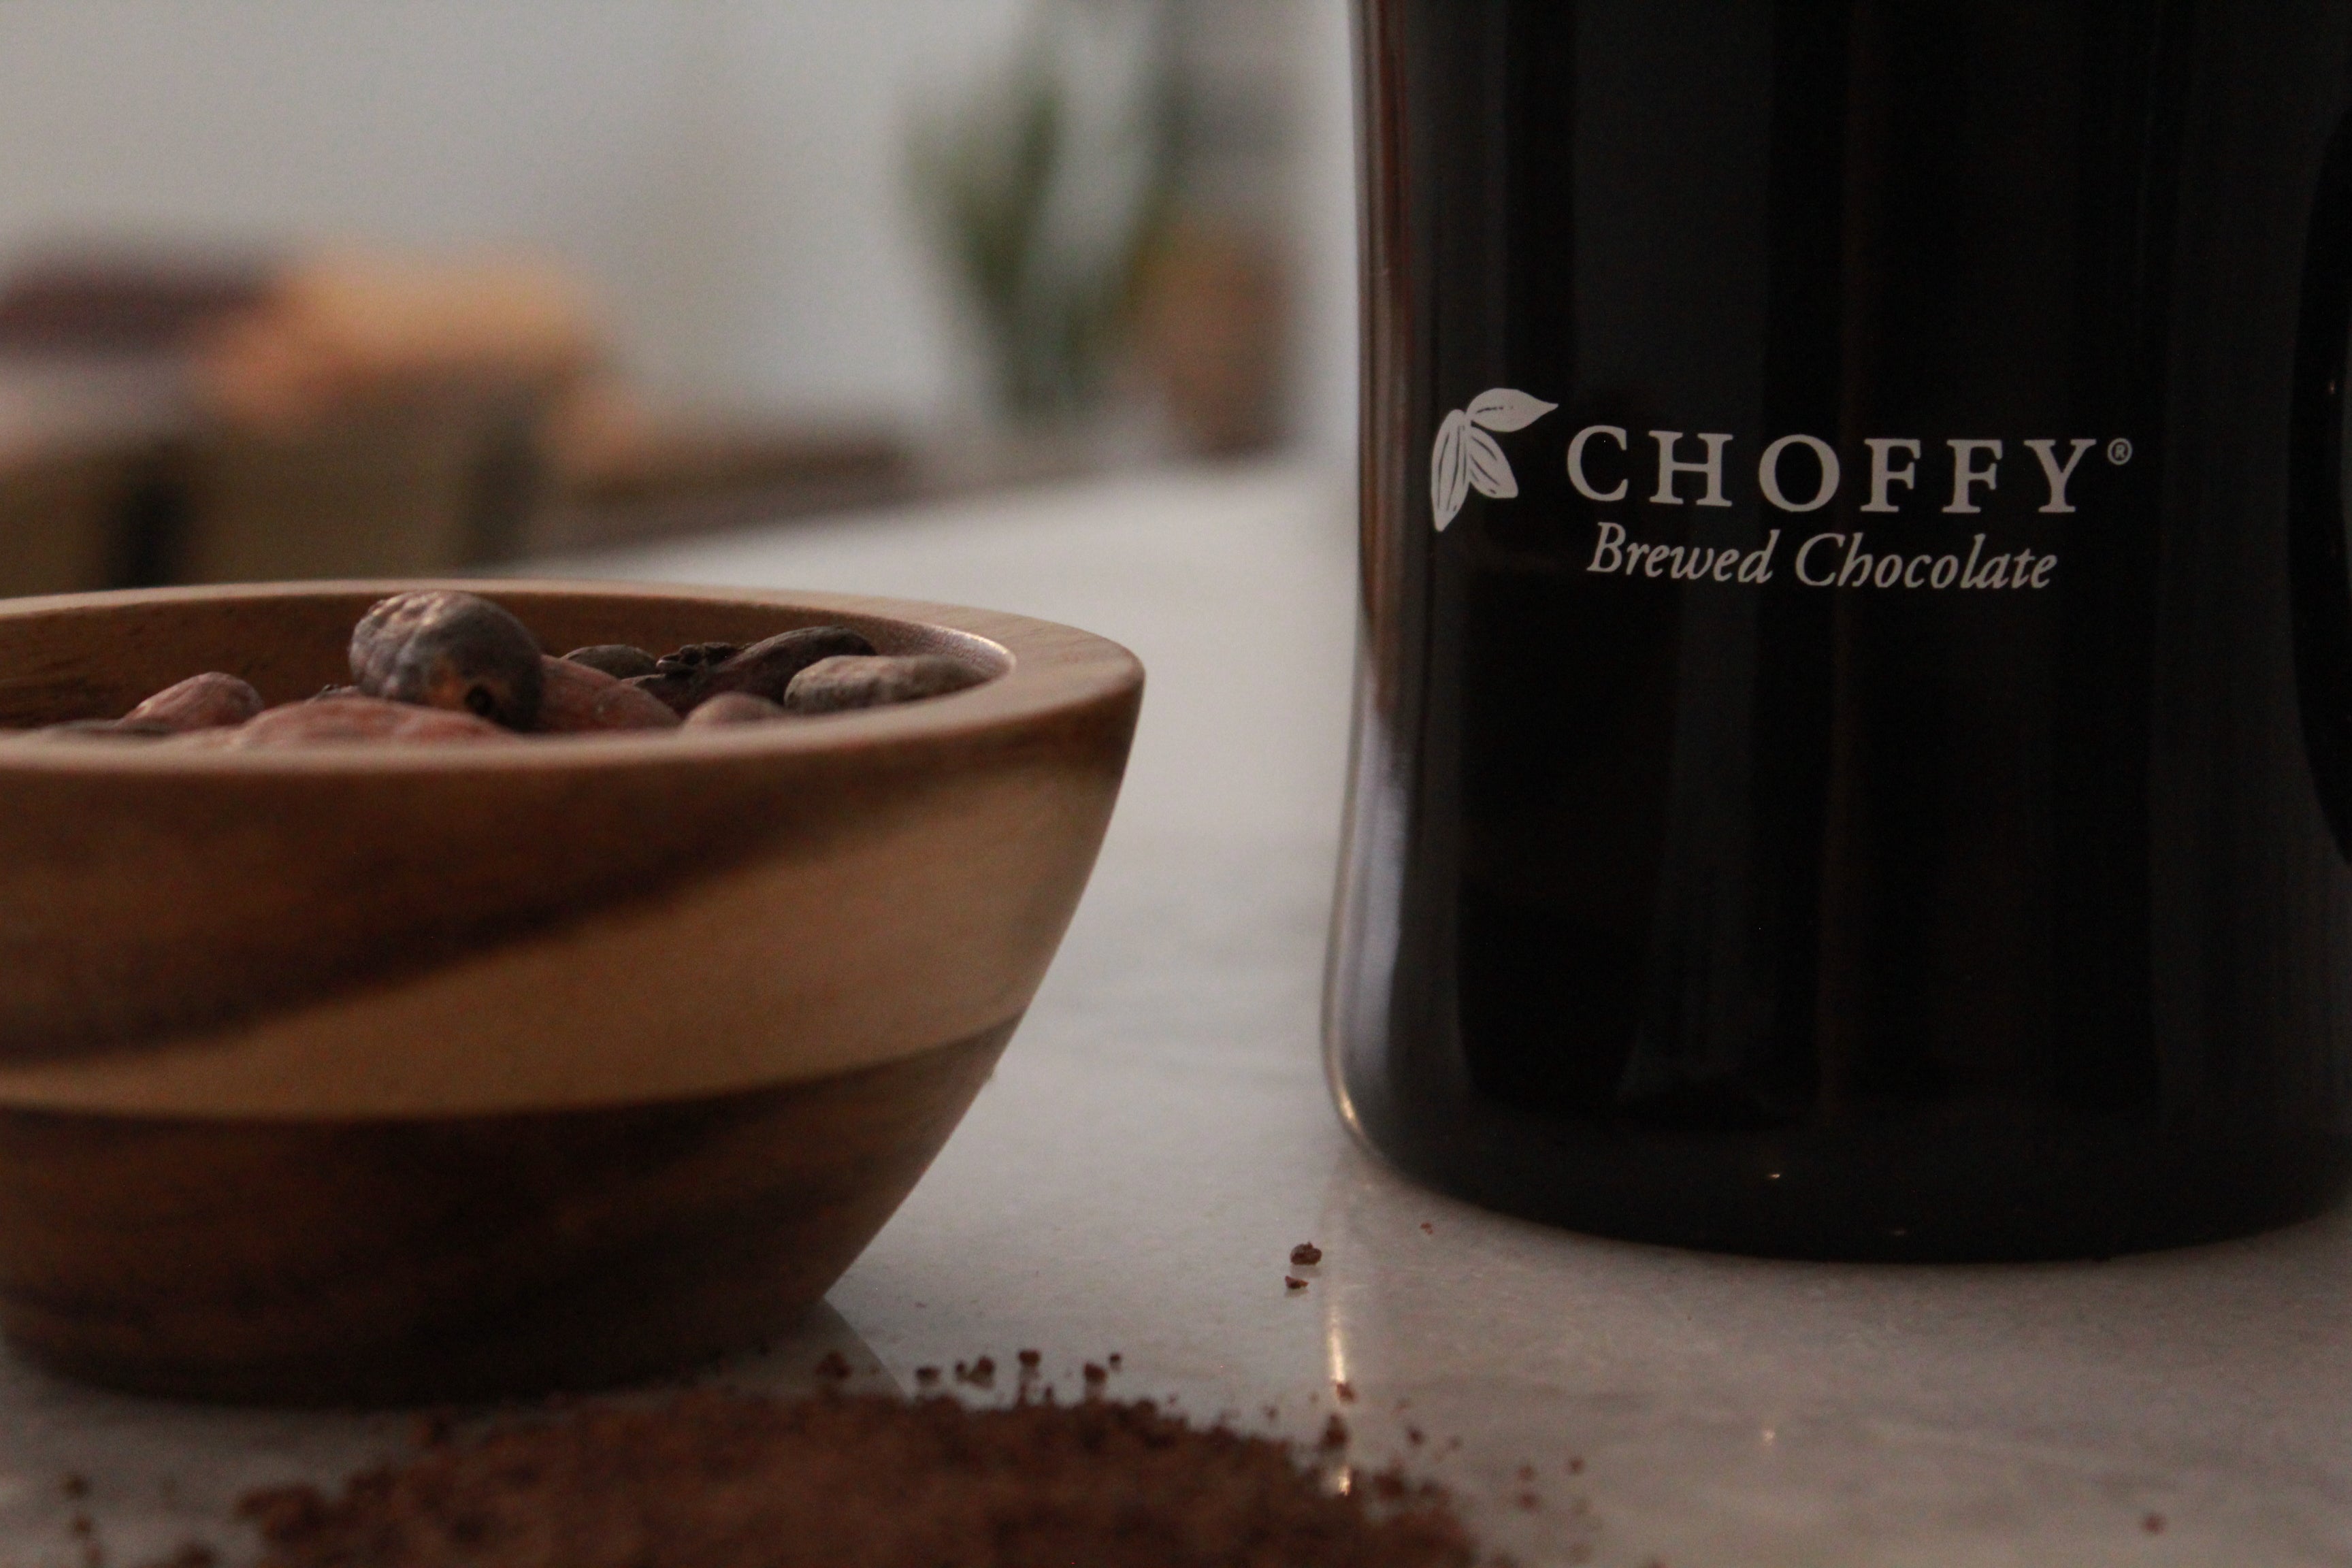 Choffy mug with cacao beans and grounds